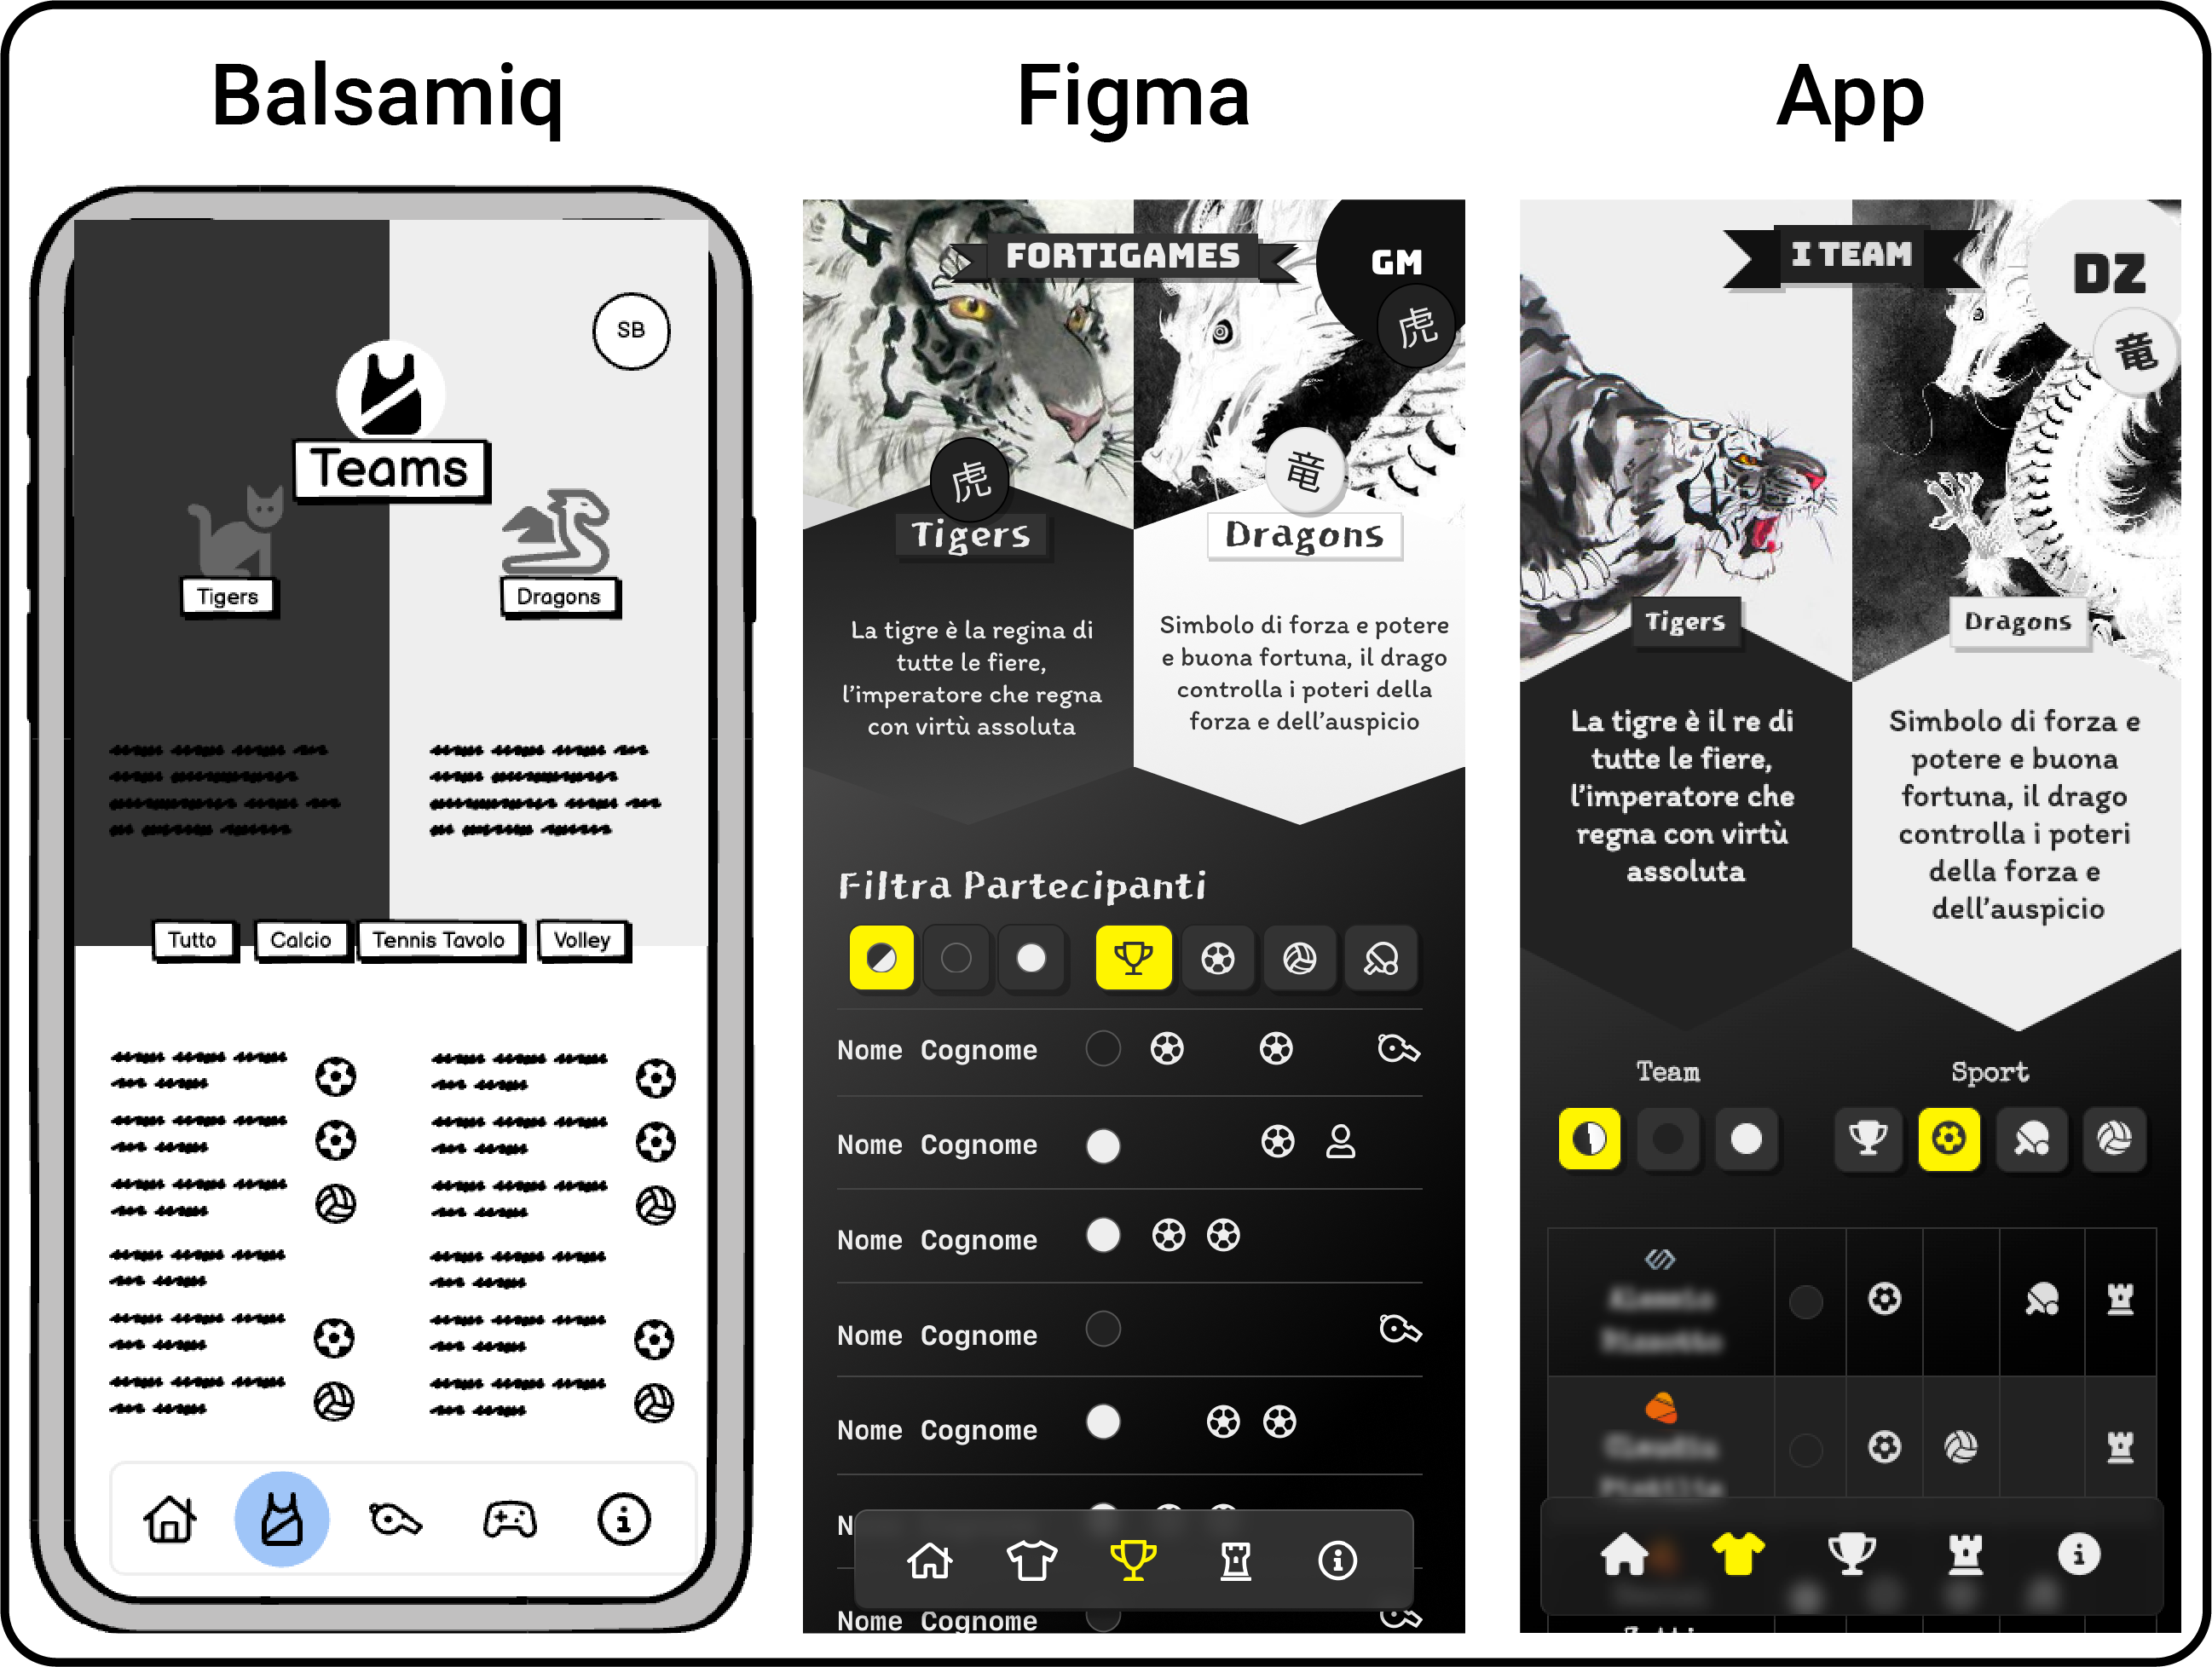 From Balsamiq, to Figma and the real app